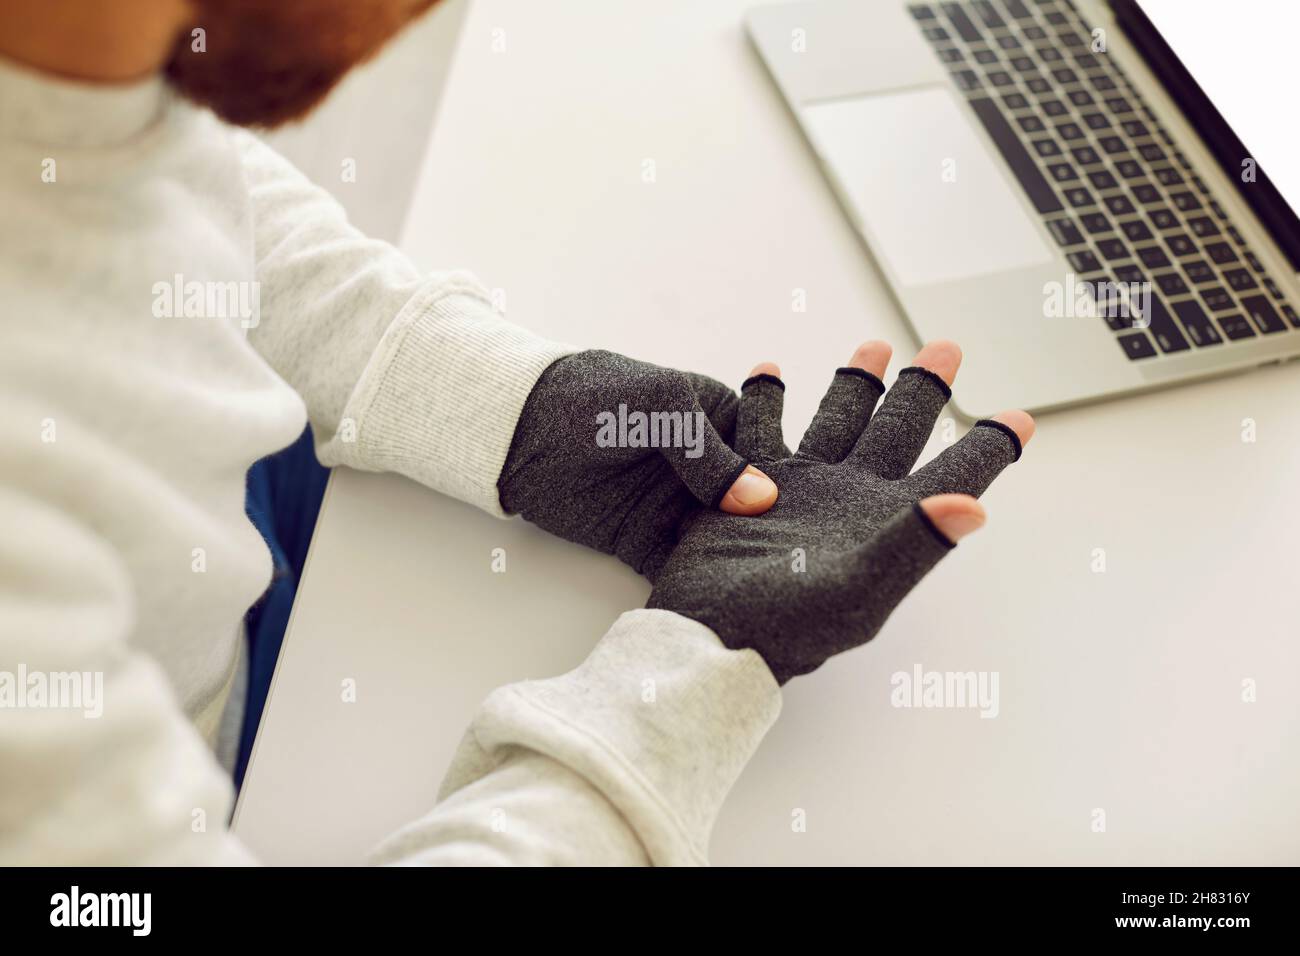 Man with rheumatoid arthritis wearing pain relief compression gloves while working on laptop Stock Photo